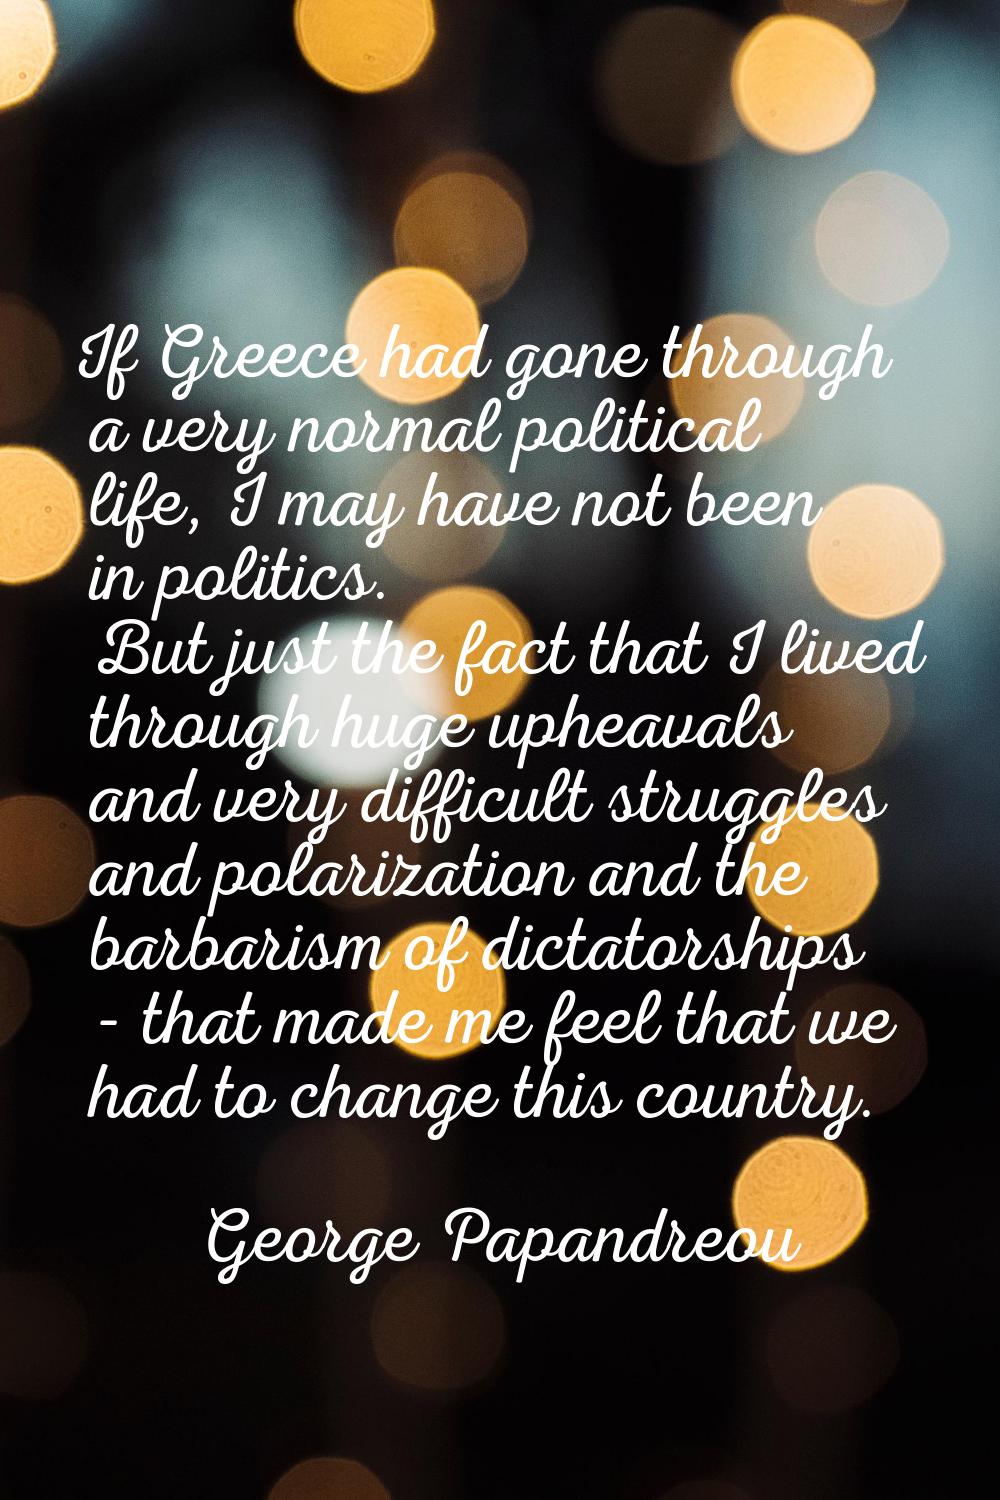 If Greece had gone through a very normal political life, I may have not been in politics. But just 